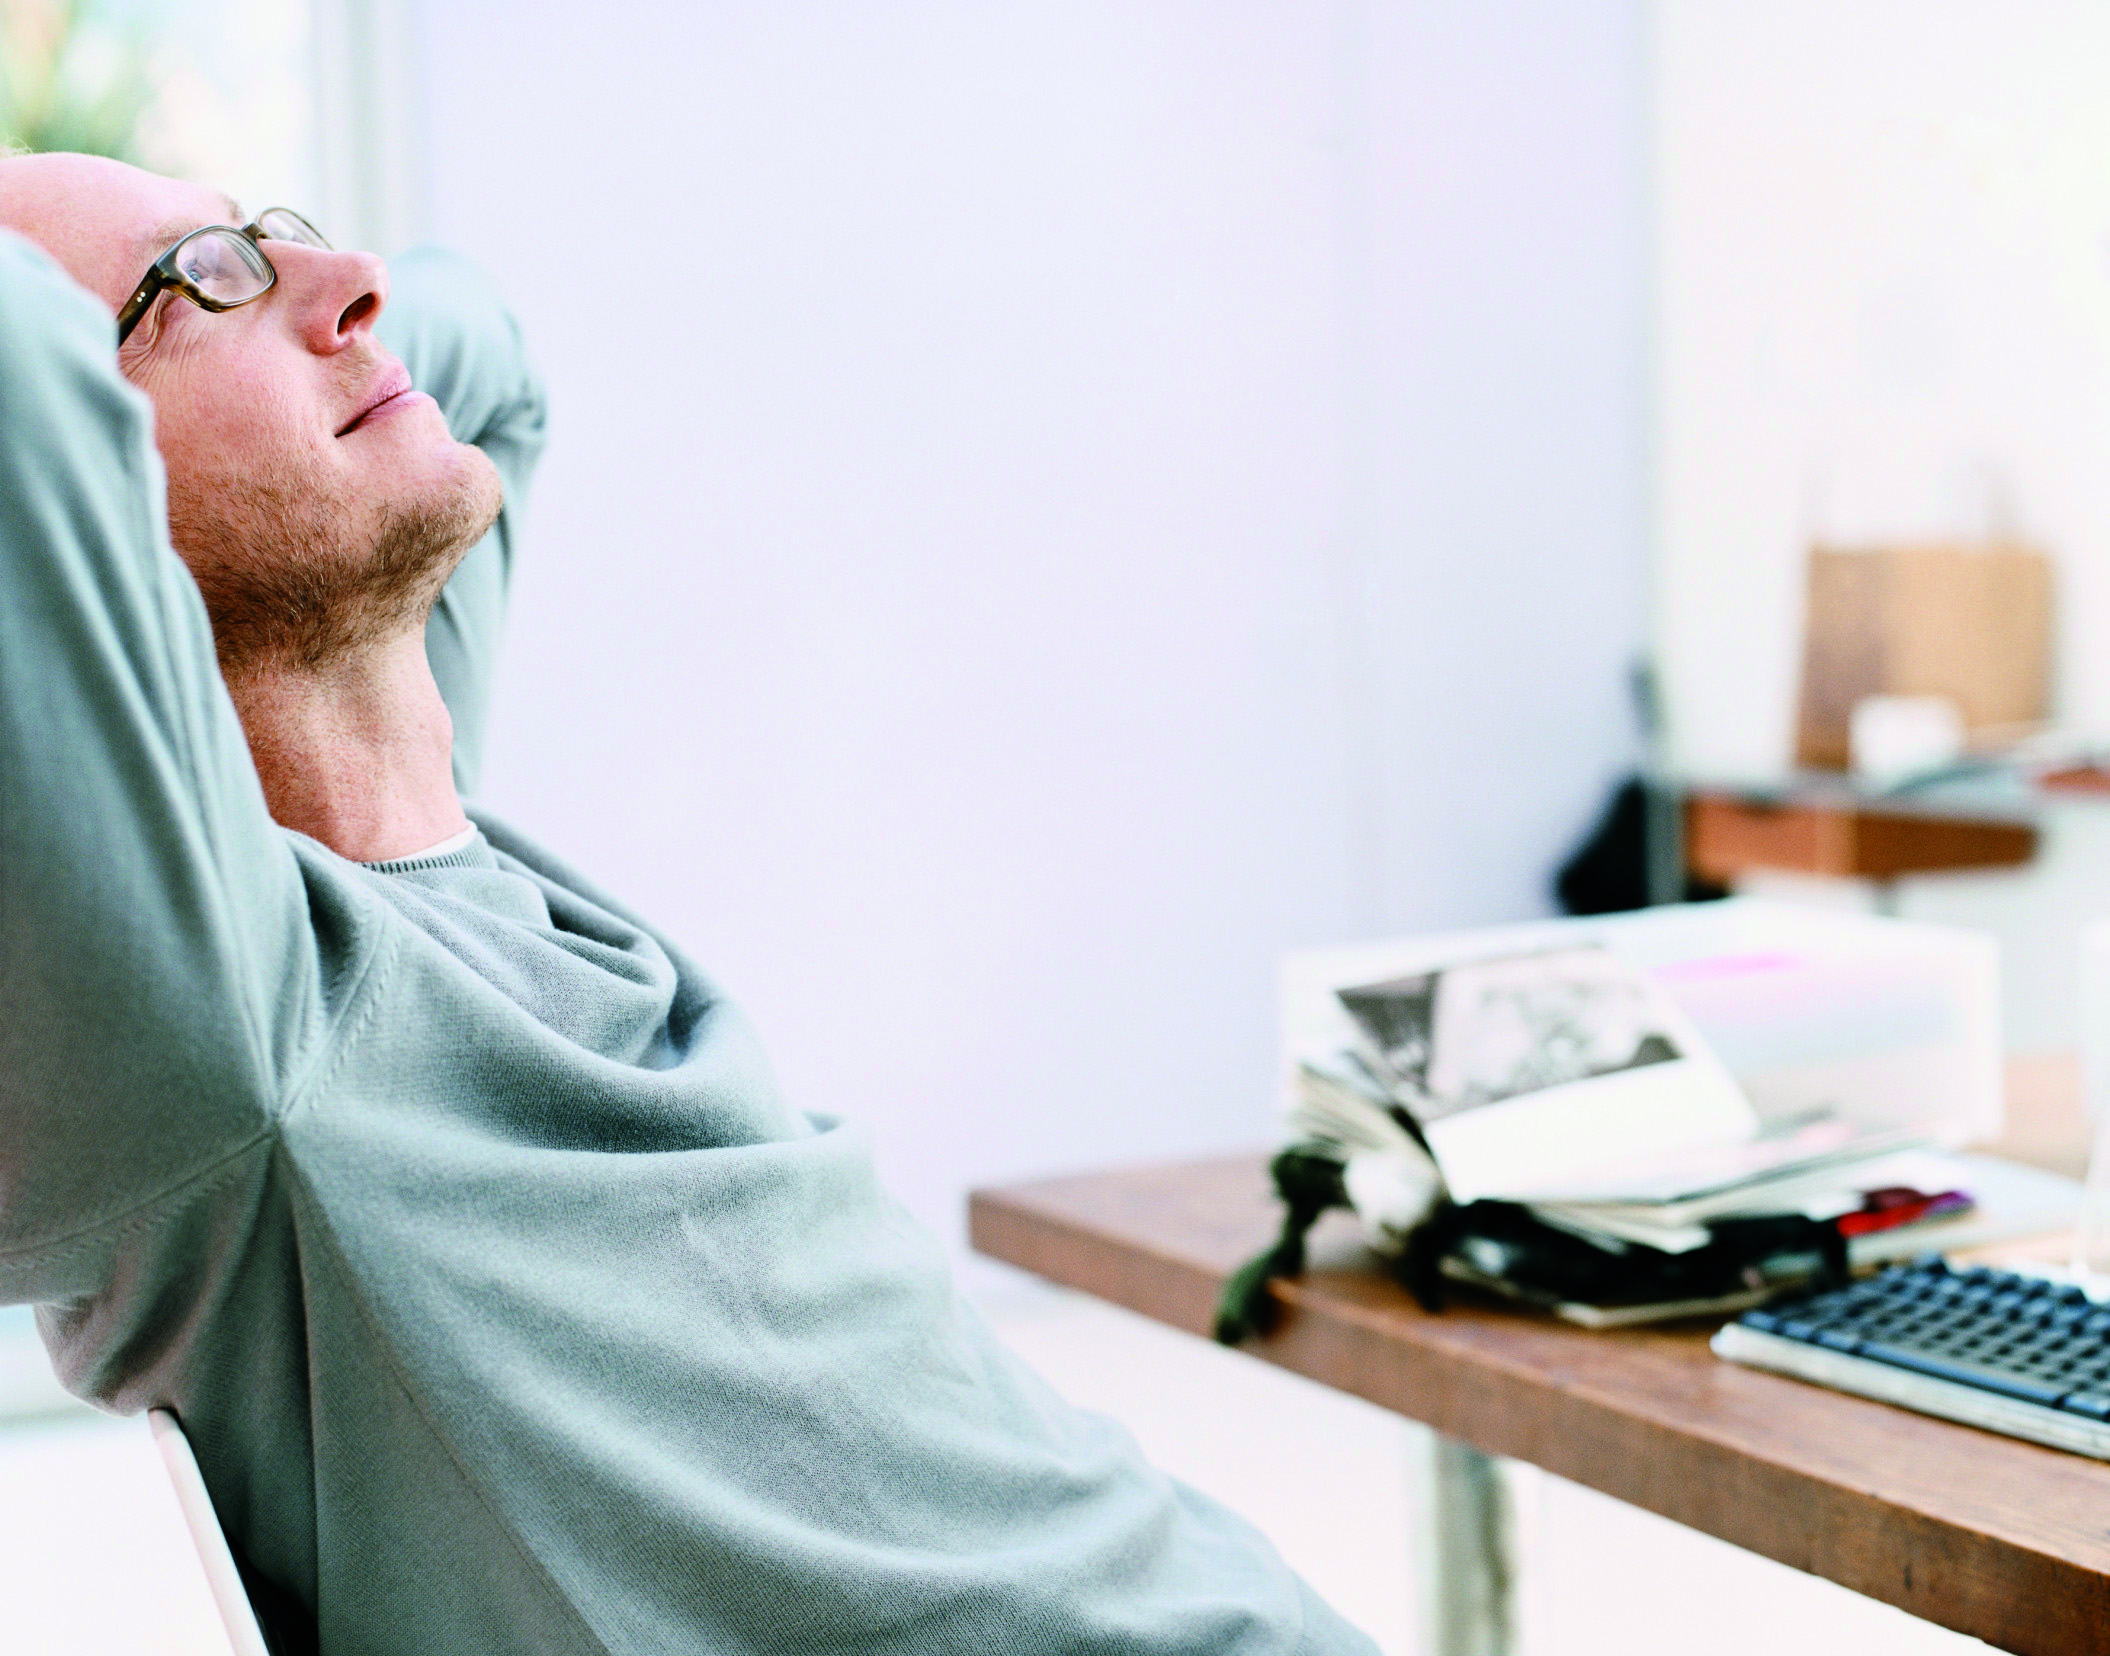 Man Sits at a Desk With His Hands Behind His Head, Looking Up and Daydreaming